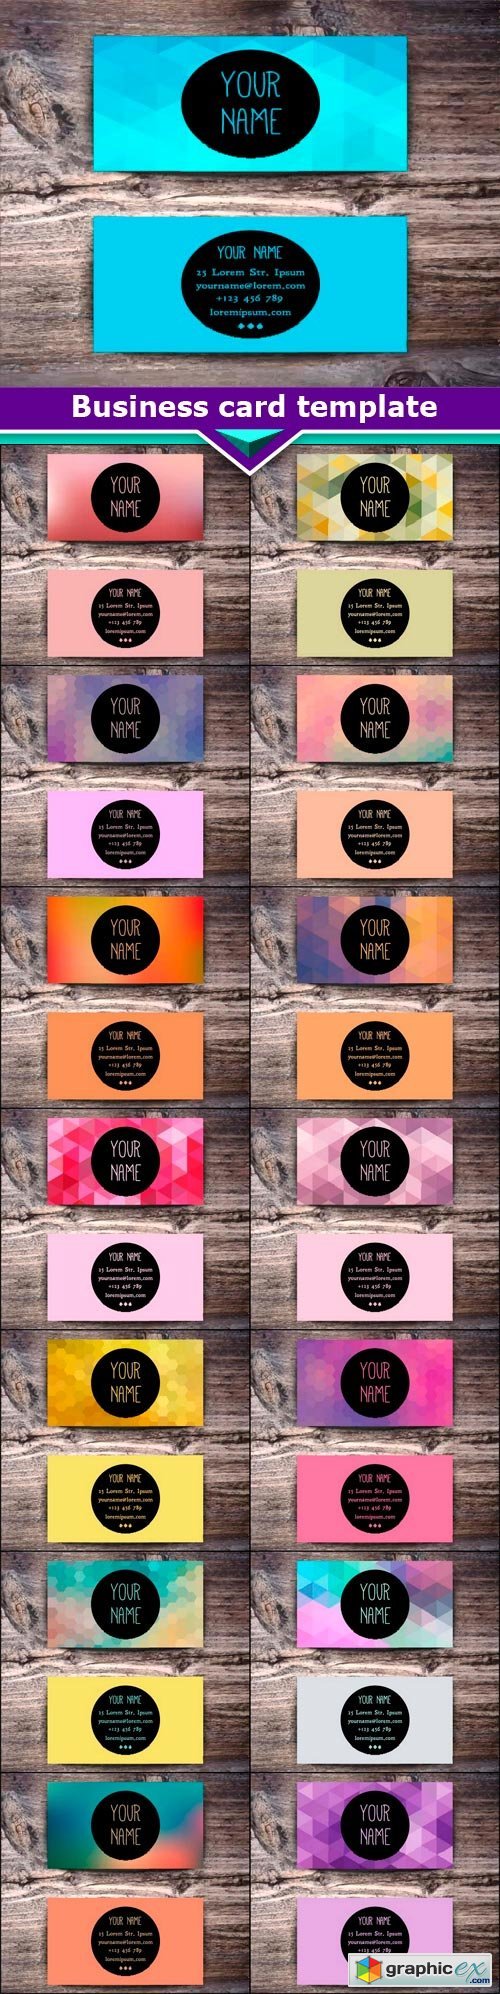 Business card template 15x EPS